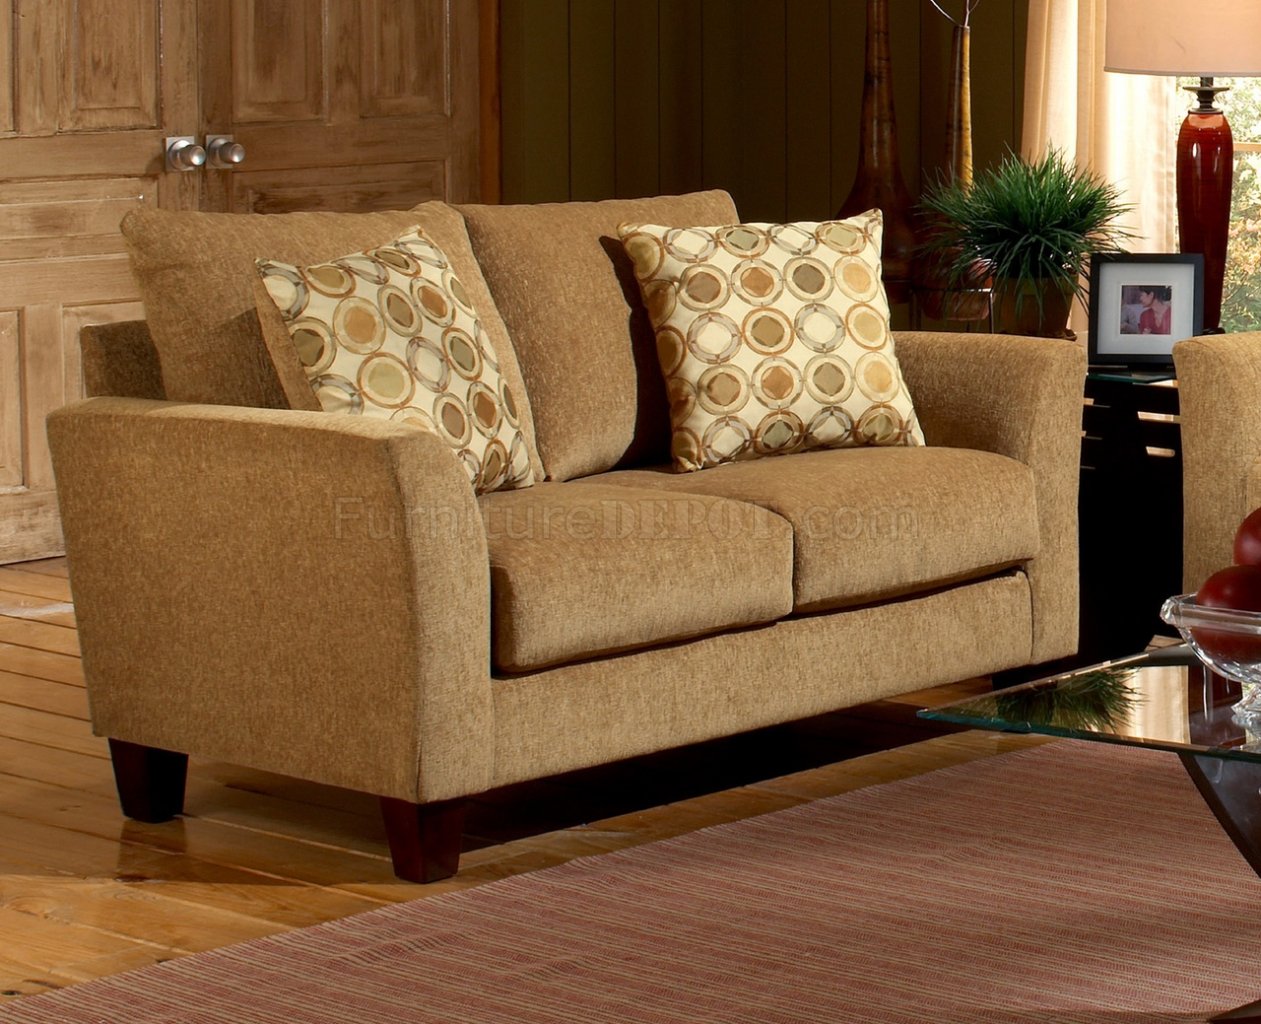 Living Room With Camel Colored Sofa